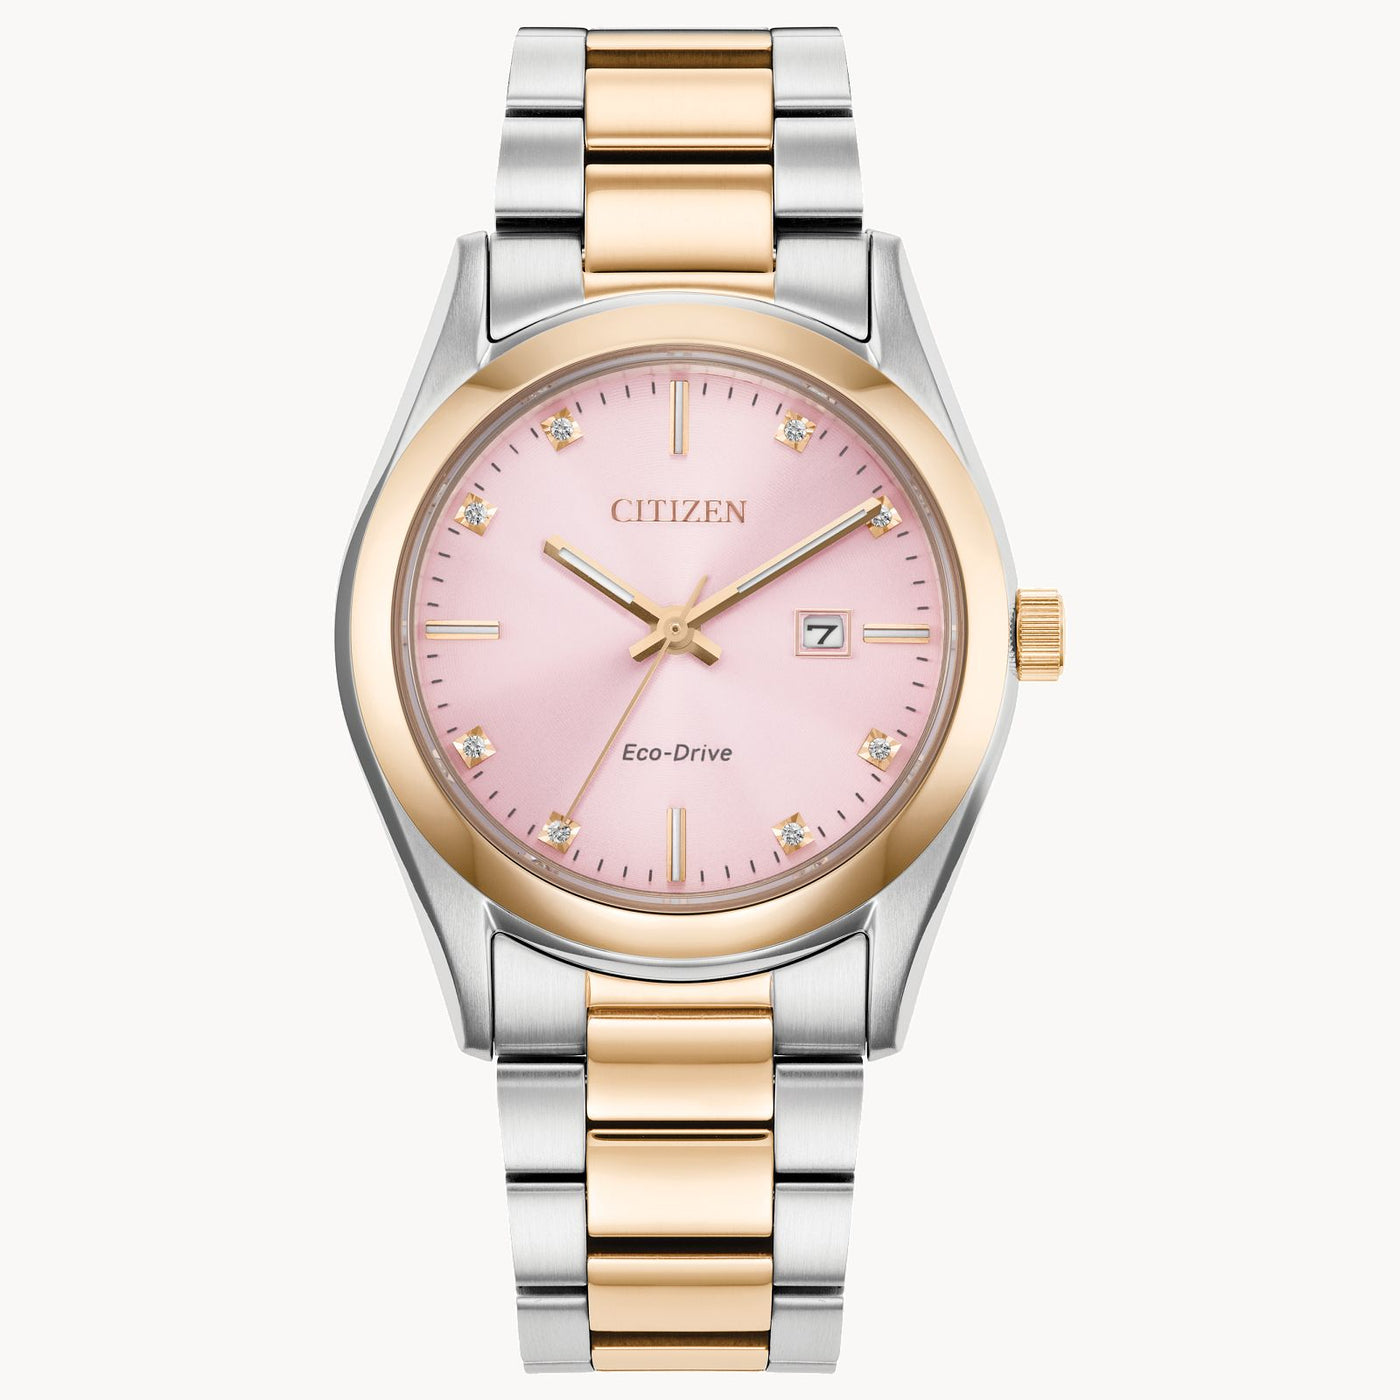 Citizen Sport Luxury Eco-Drive Two-Tone Stainless Steel Watch with a Radiant Pink Dial and Diamond Accents